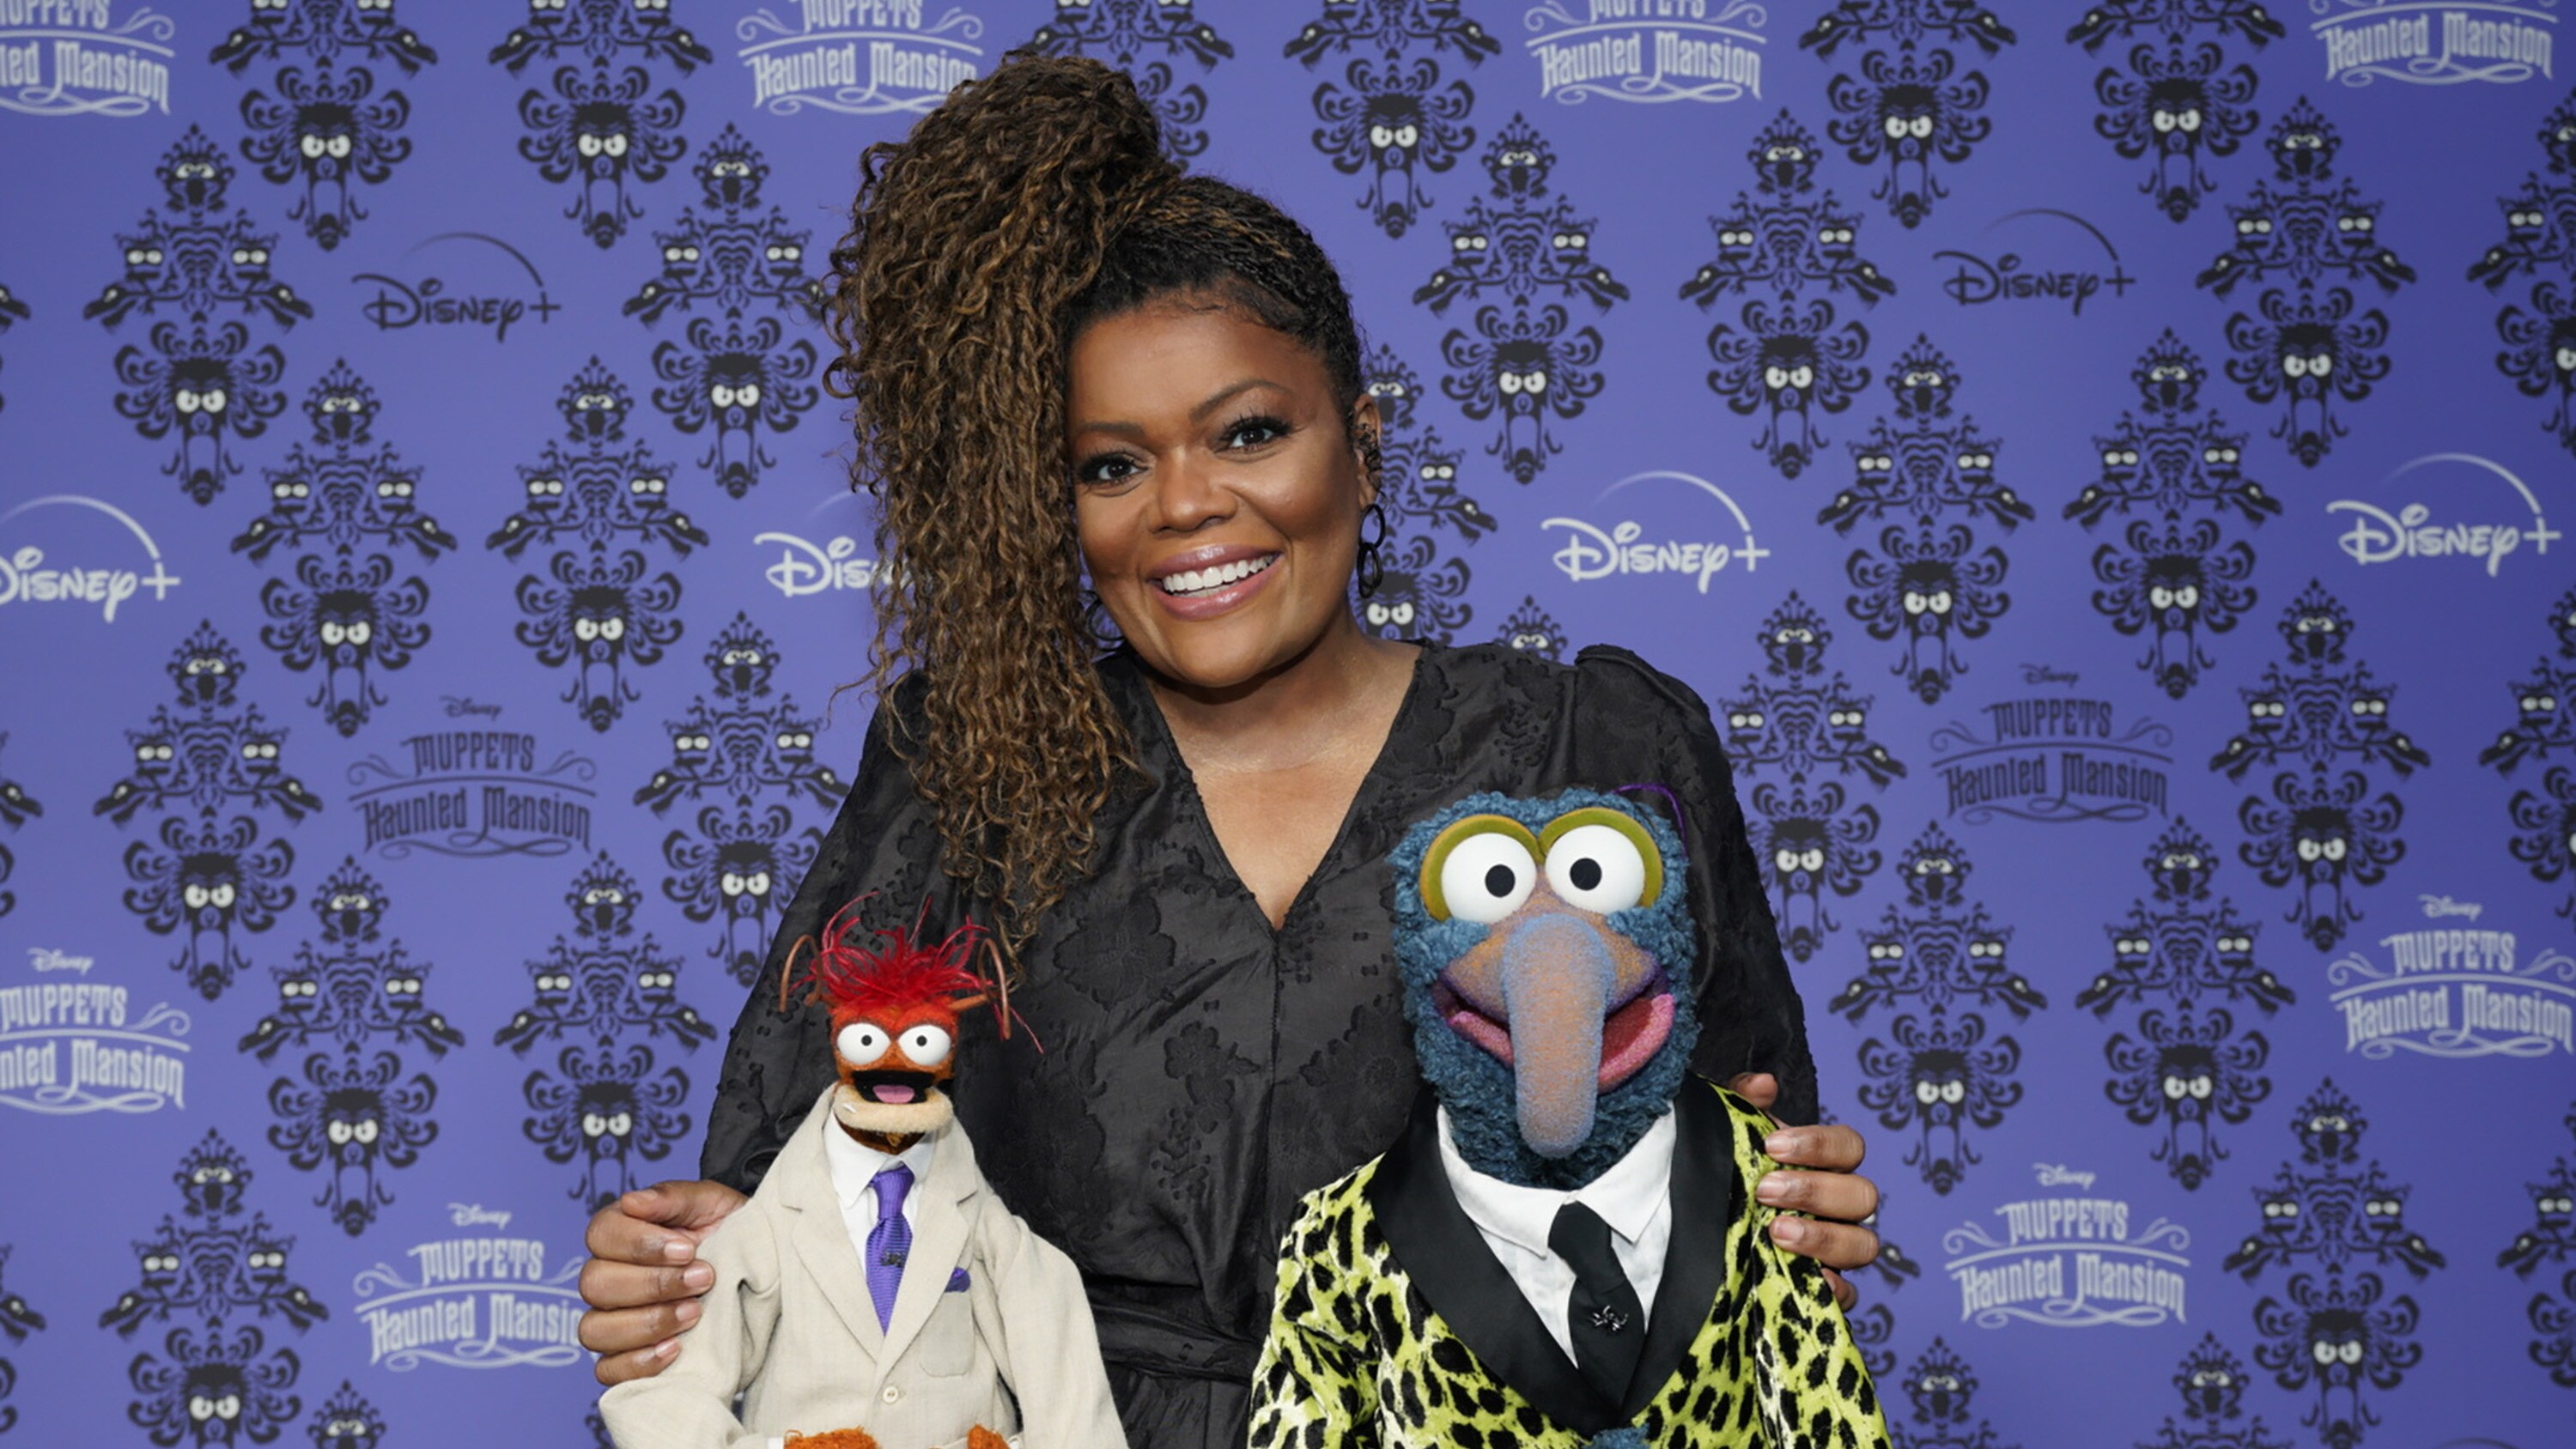 MUPPETS HAUNTED MANSION - Stars of The Muppets first-ever Halloween special "Muppets Haunted Mansion" attended the Drive-In Premiere Event at West Los Angeles College, Thursday, October 7. "Muppets Haunted Mansion" is available to stream Friday, October 8 on Disney+. (Disney/Jacqueline Jones) PEPE THE KING PRAWN, YVETTE NICOLE BROWN, GONZO